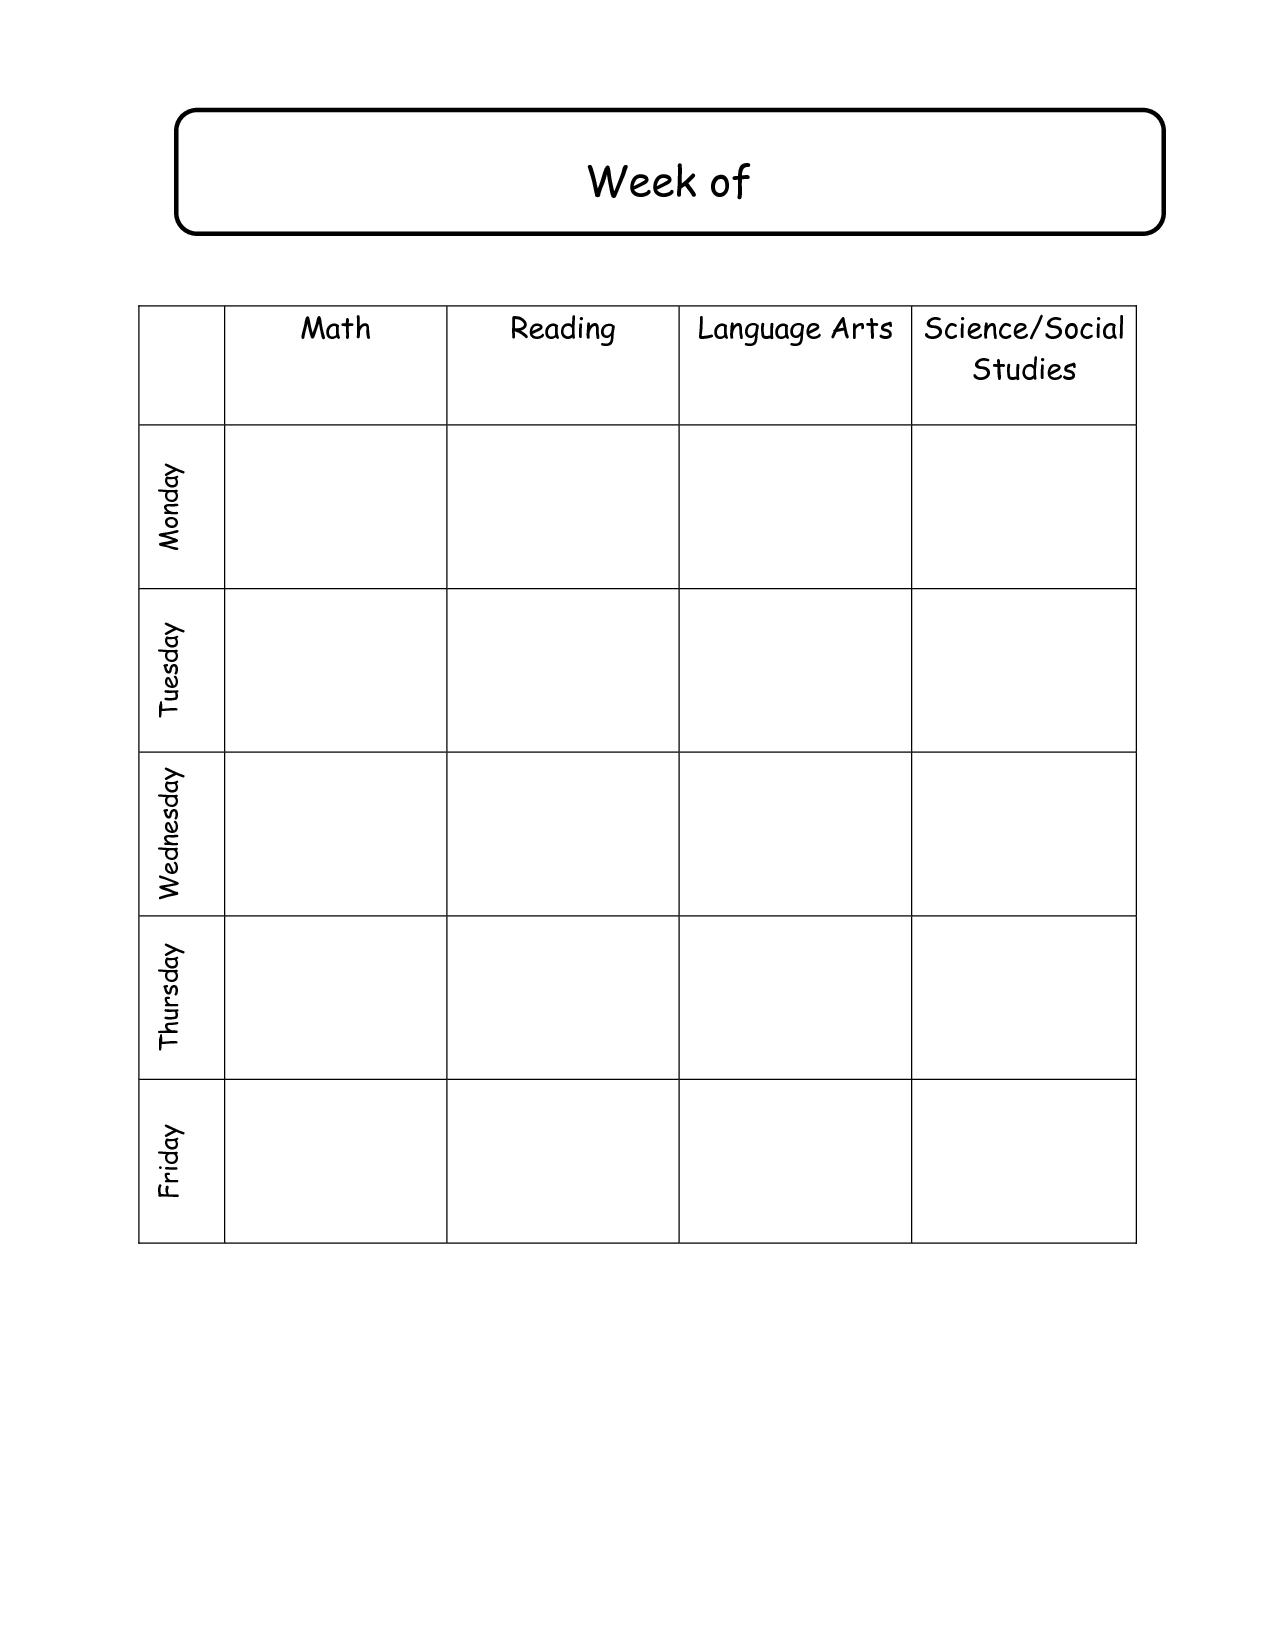 Elementary School Daily Schedule Template | Weekly Lesson